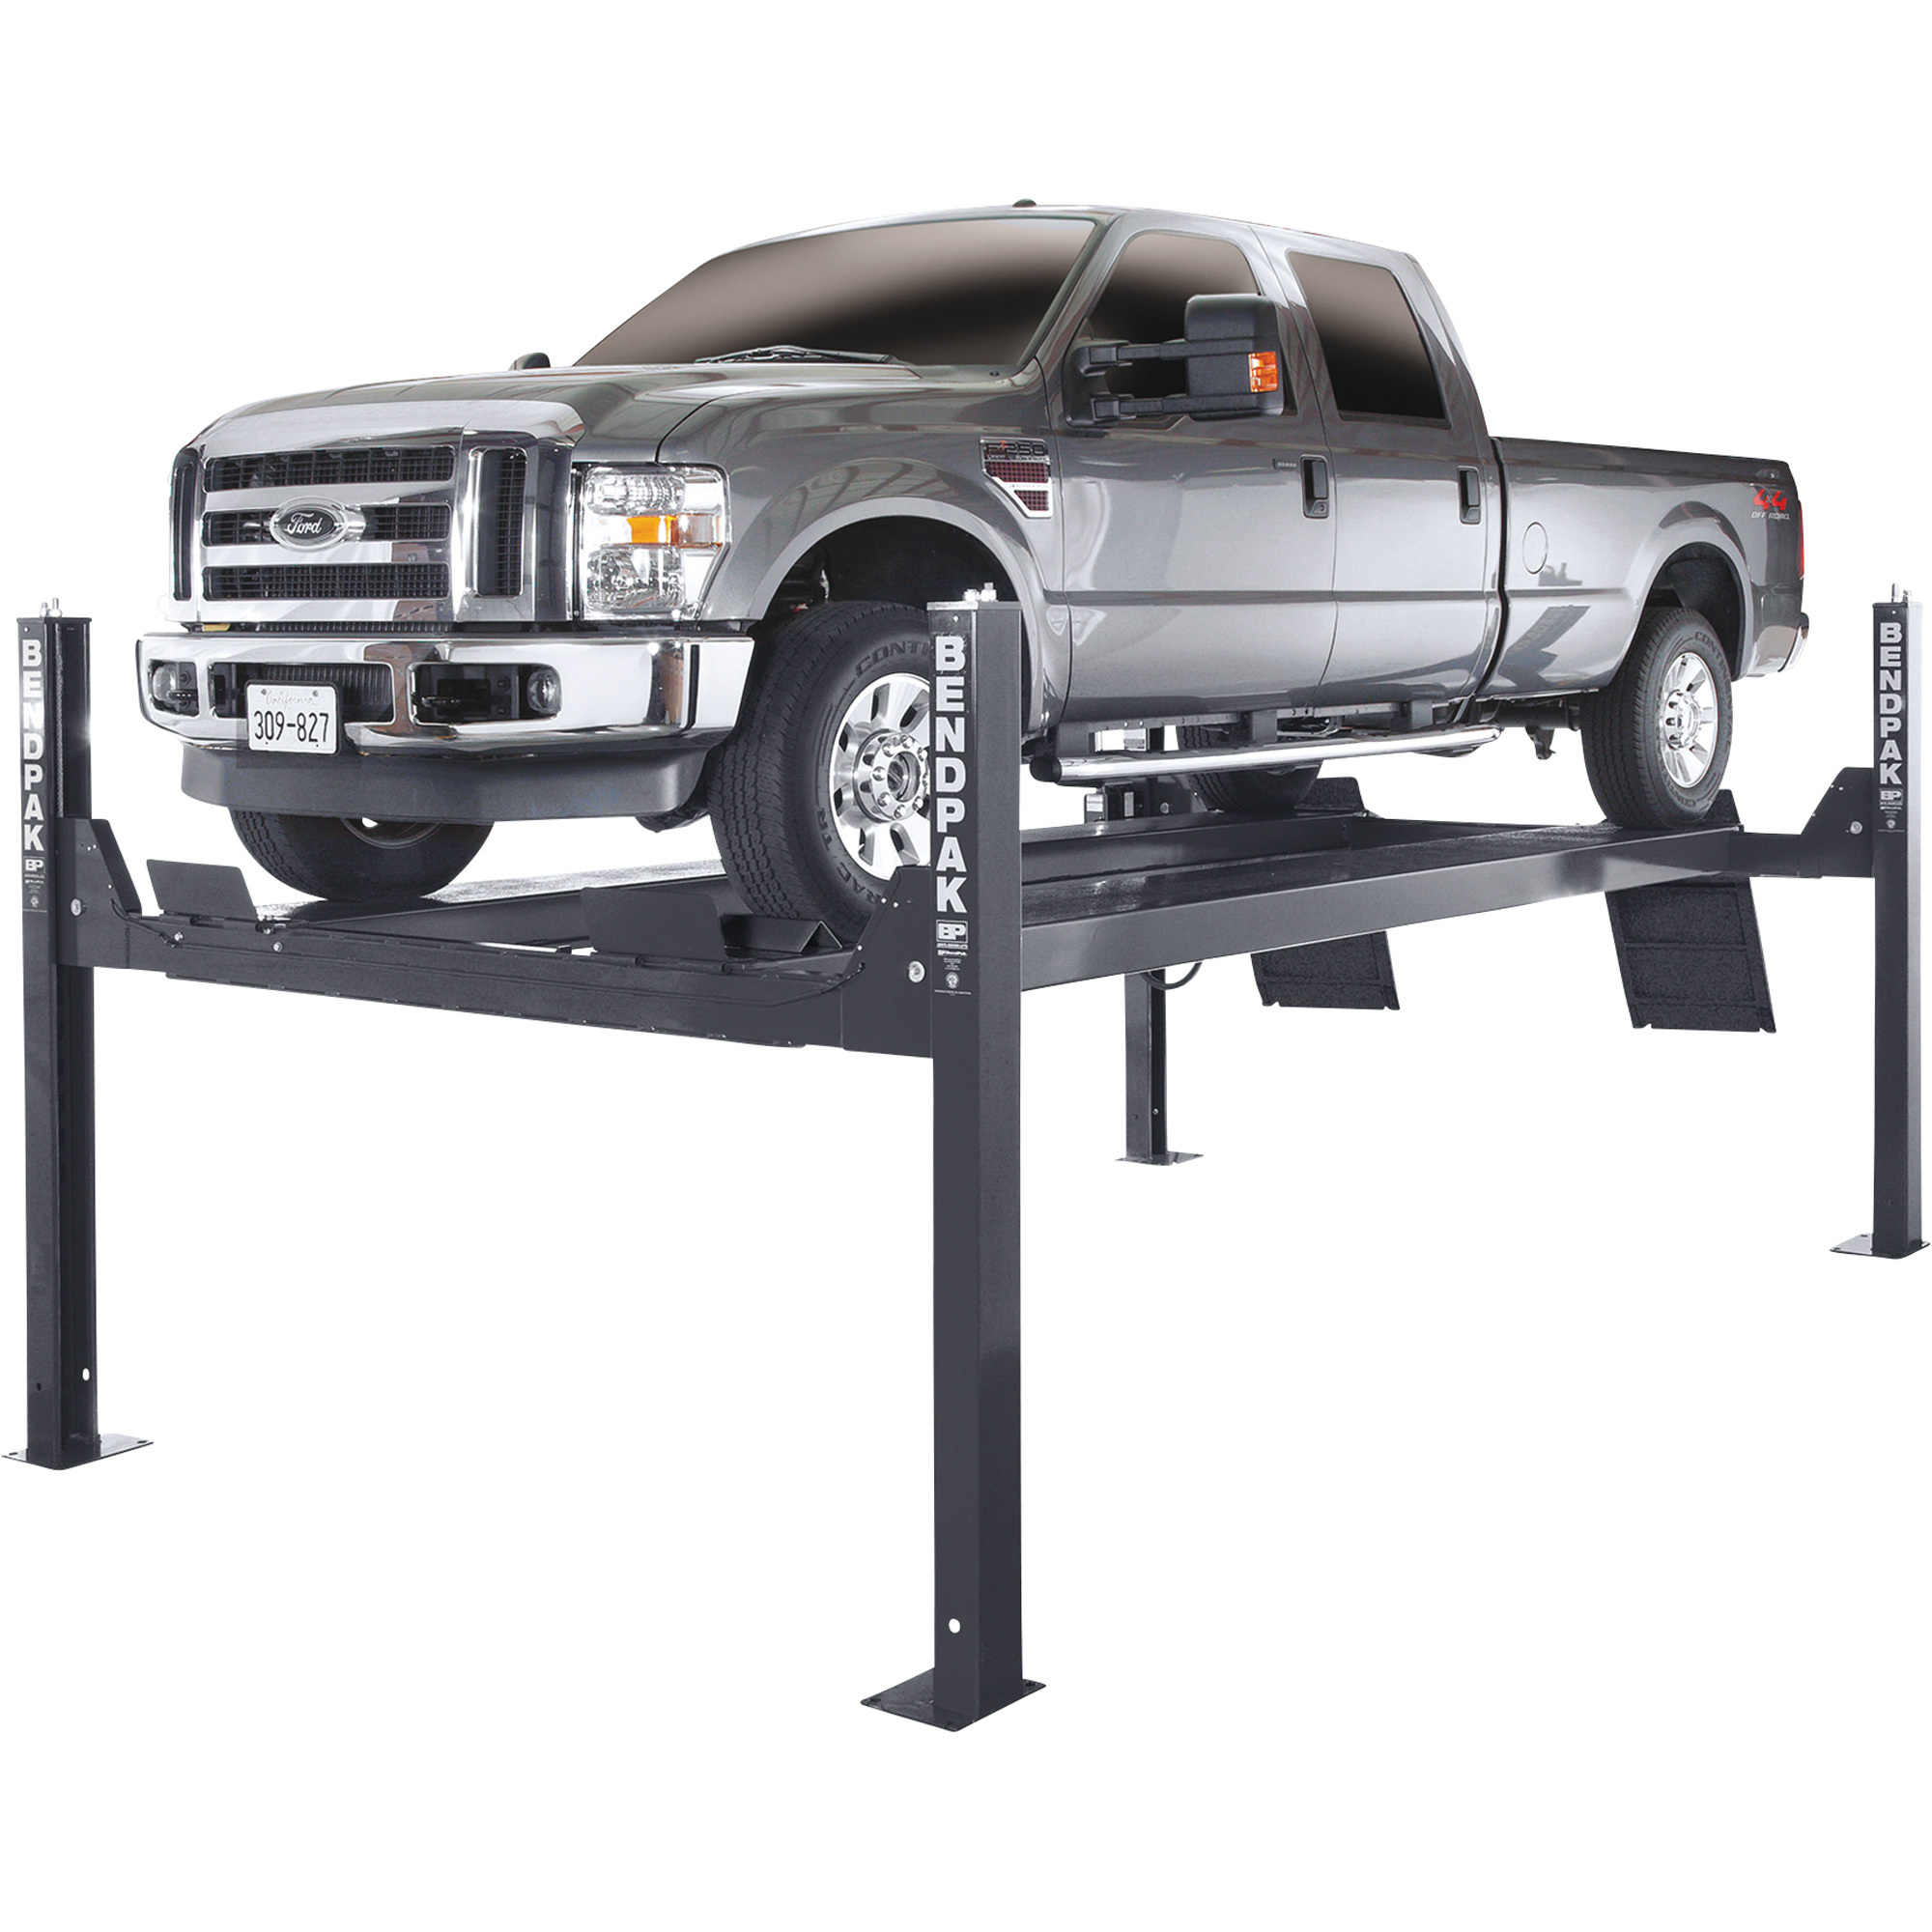 BendPak 4-Post Extended Length Truck and Car Lift, 14,000-Lb. Capacity, Model HDS-14X